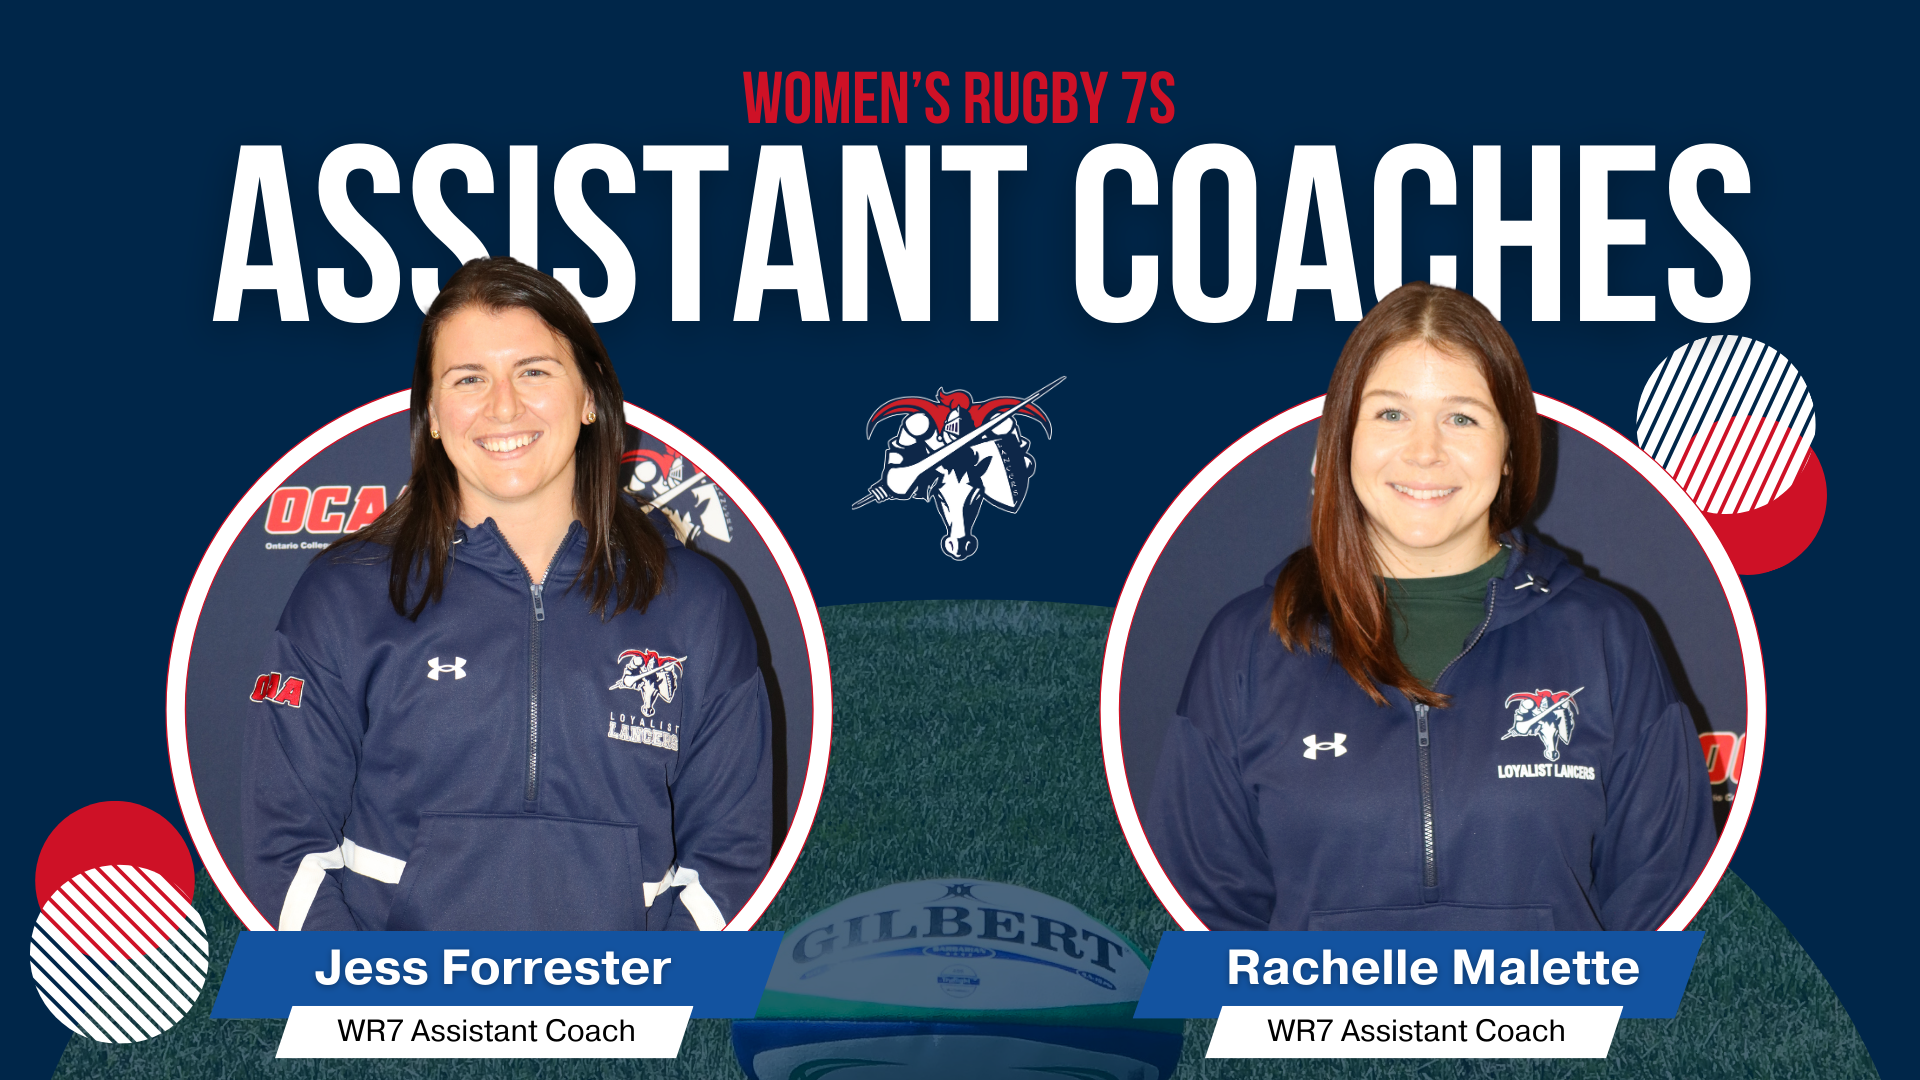 FORRESTER &amp; MALETTE JOIN WOMEN'S RUGBY 7S COACHING STAFF